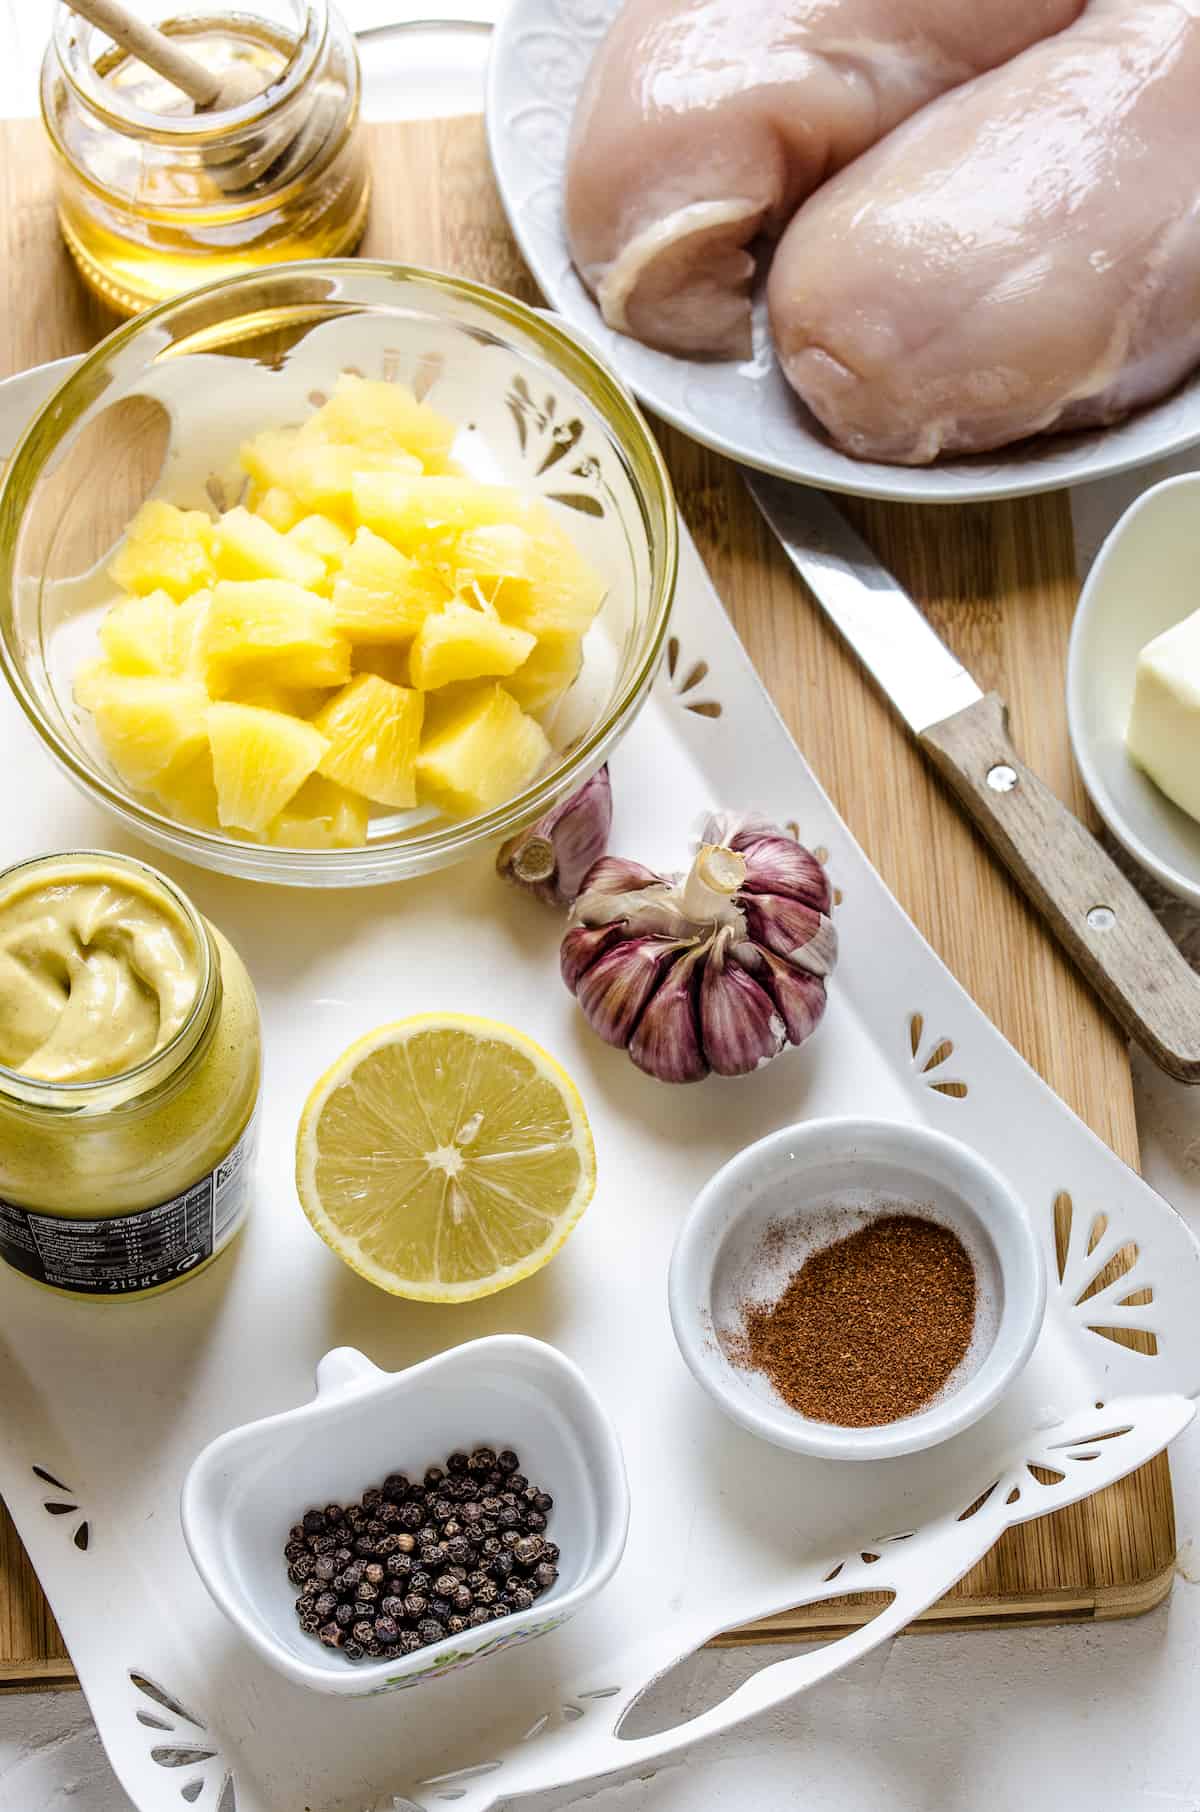 The ingredients for Hawaiian baked chicken: Chicken breasts, butter, paprika, pepper, dijon mustard, pineapple chunks, honey and lemon.